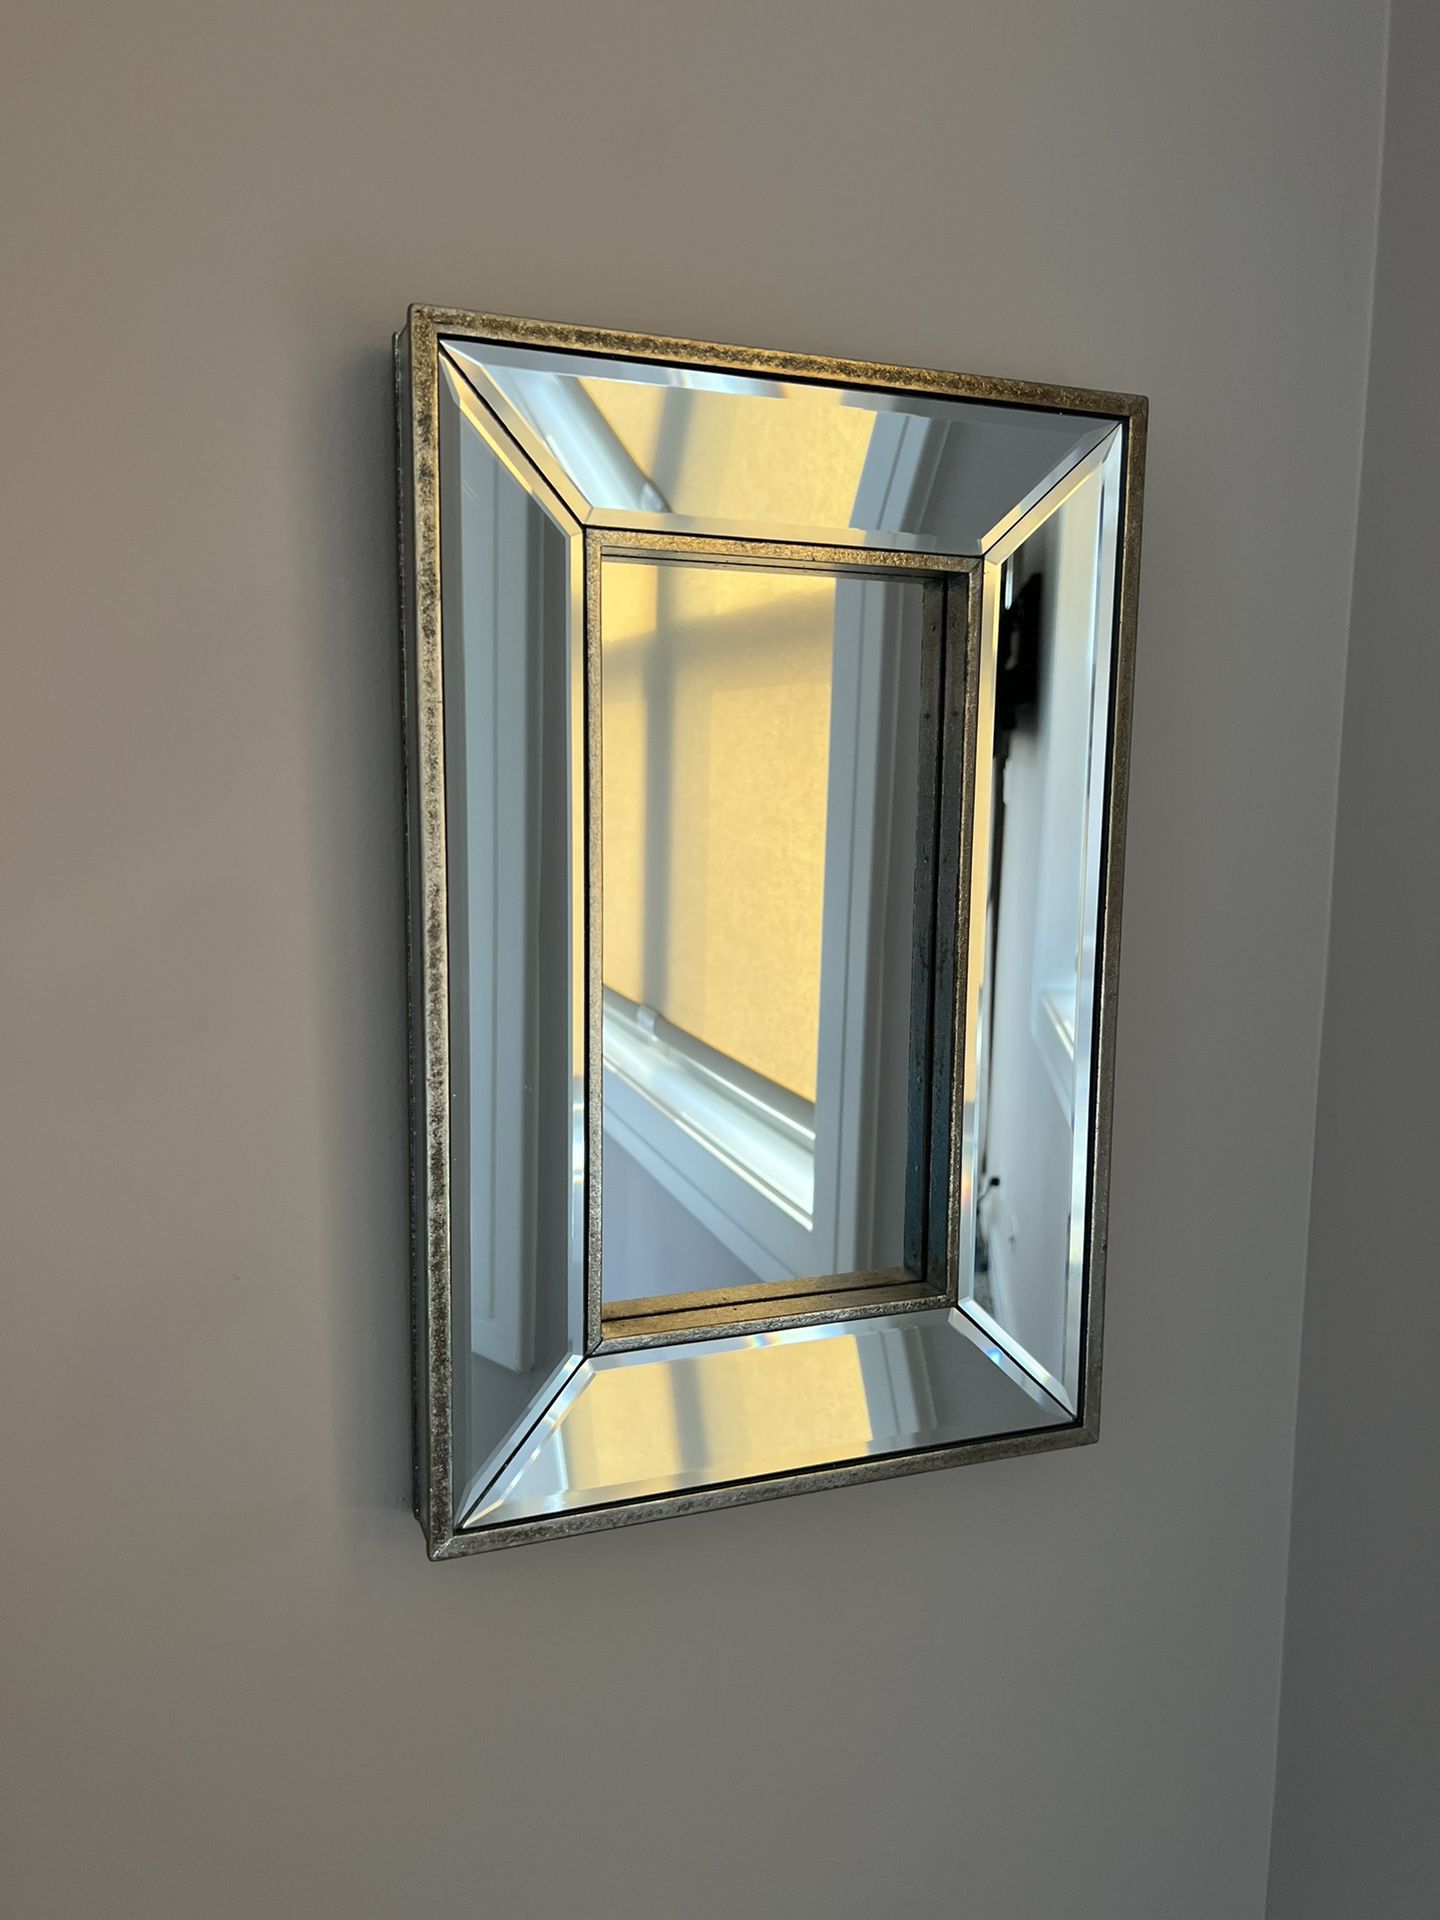 2 NEW TOP QUALITY MIRRORS 18”x12”